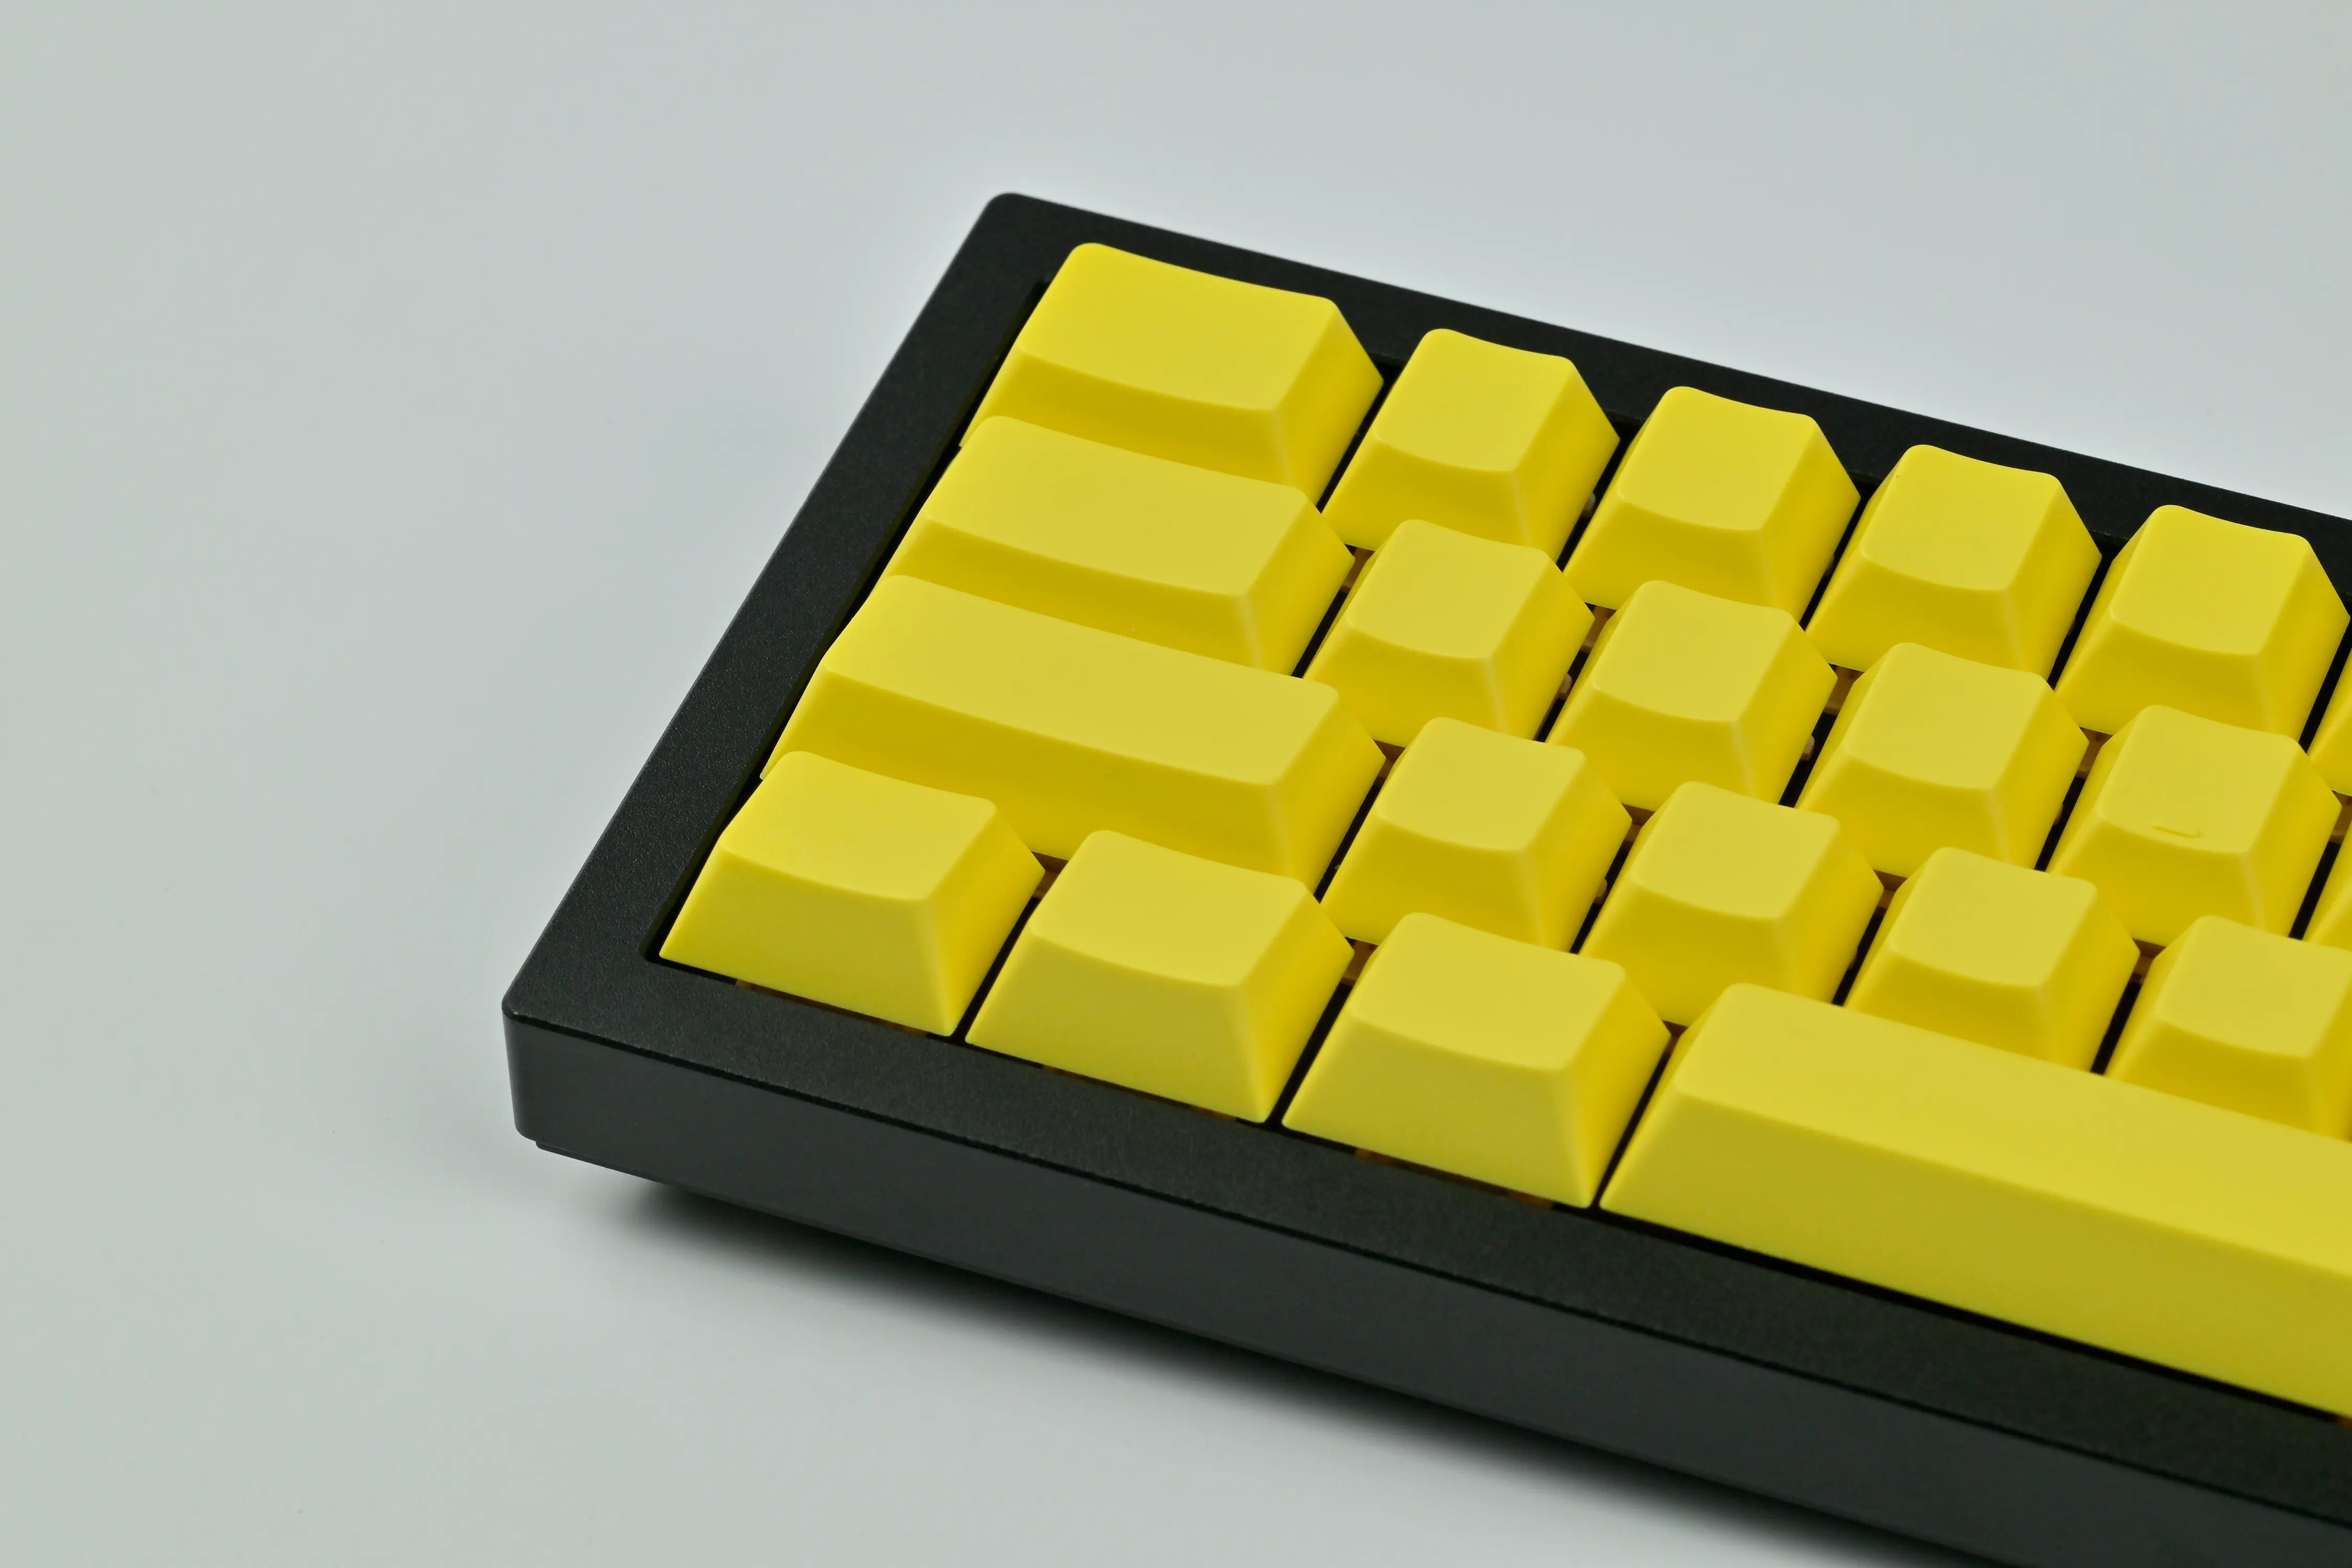 Keyreative ABS Cherry Profile Yellow Blank Keycaps